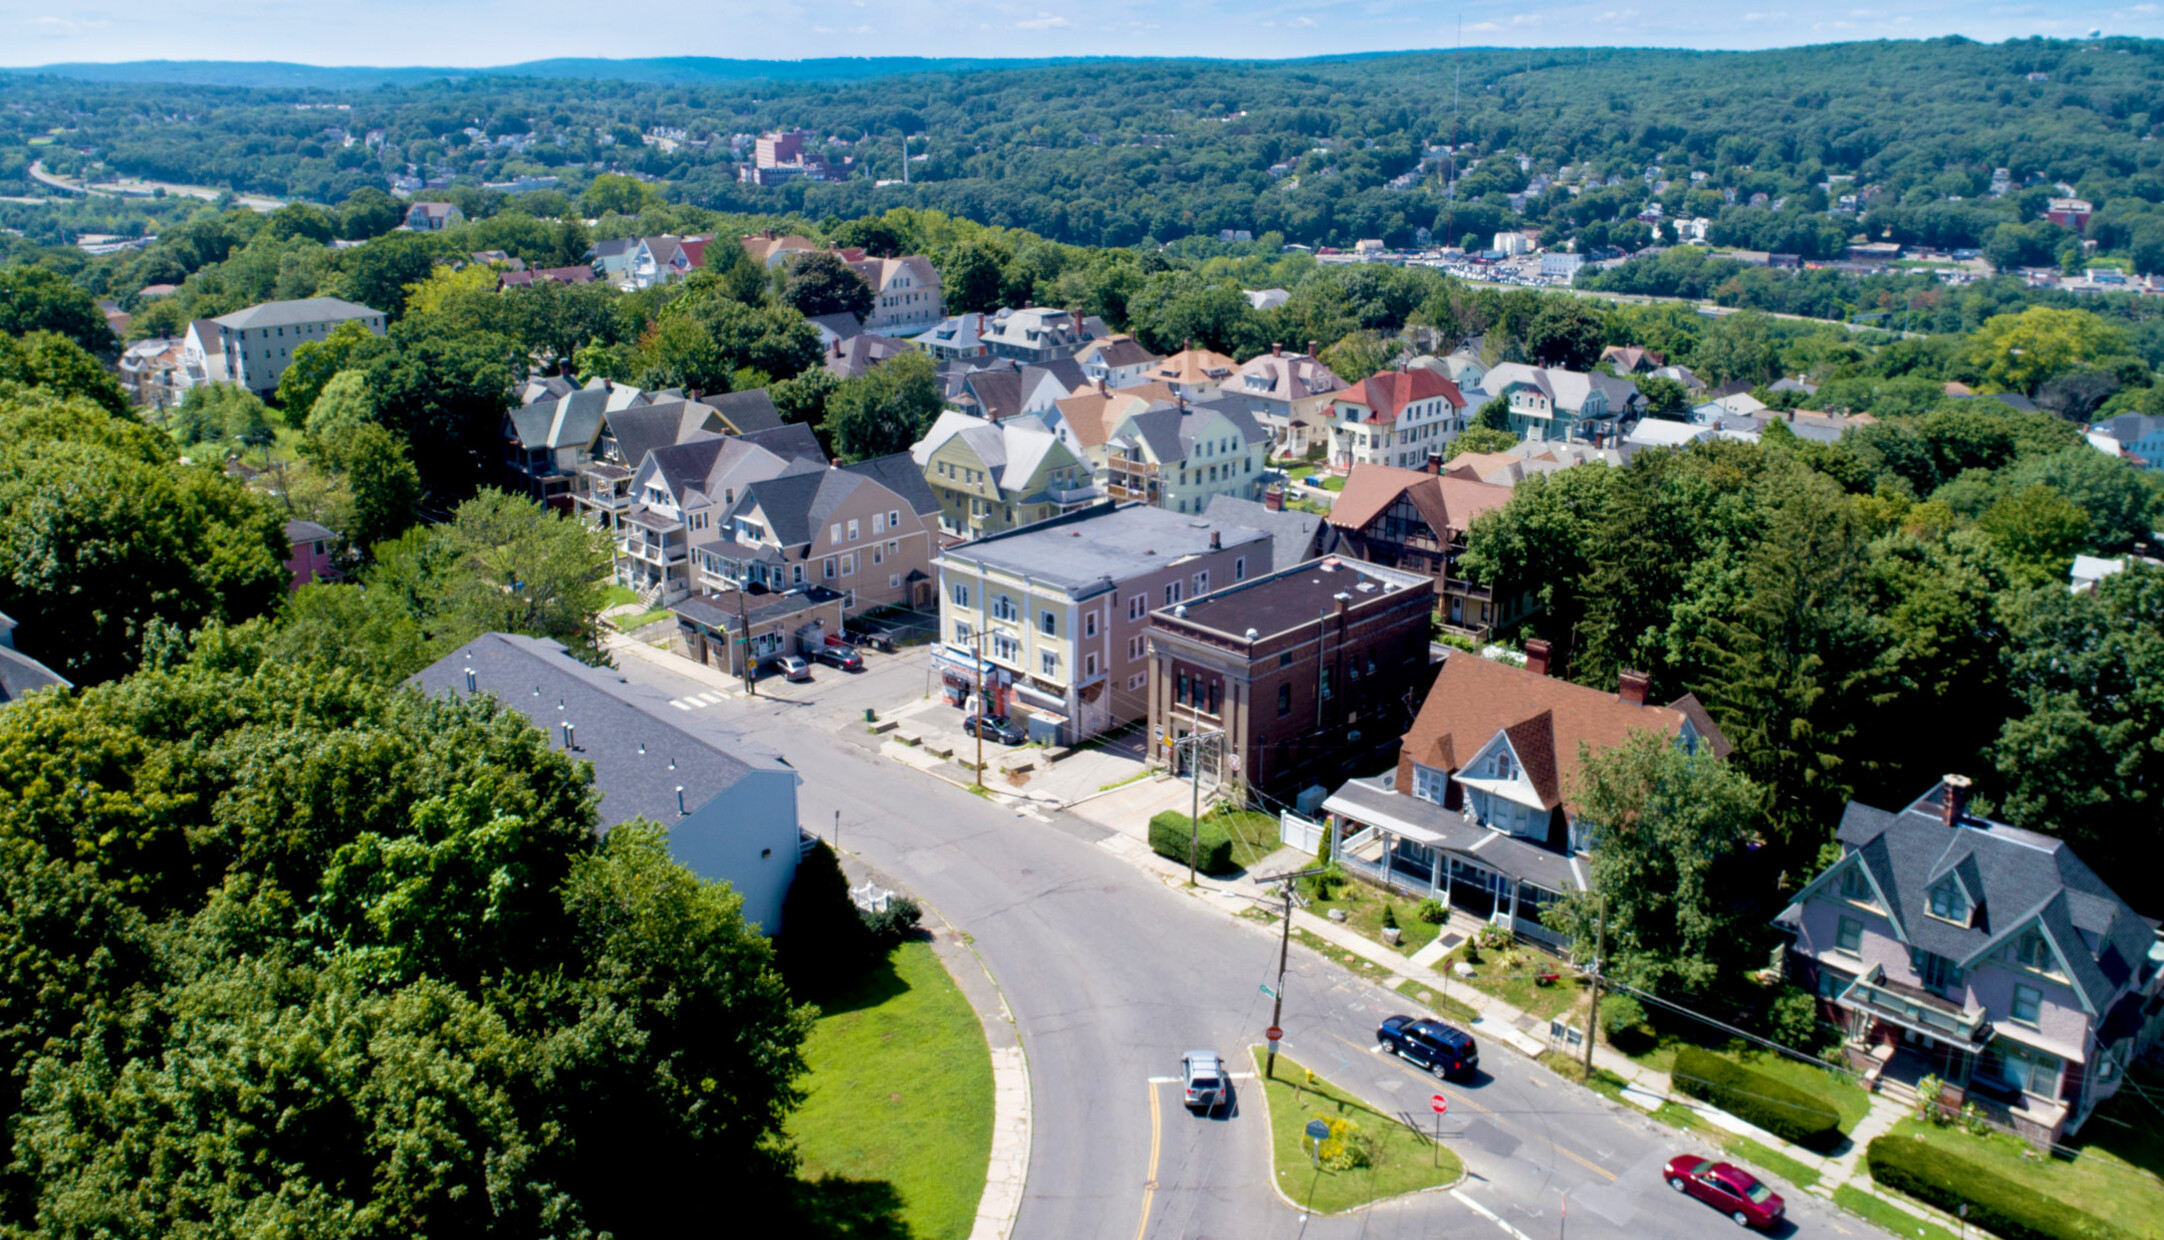 An aerial view of buildings and streets in the Willow Plaza neighborhood in Waterbury 